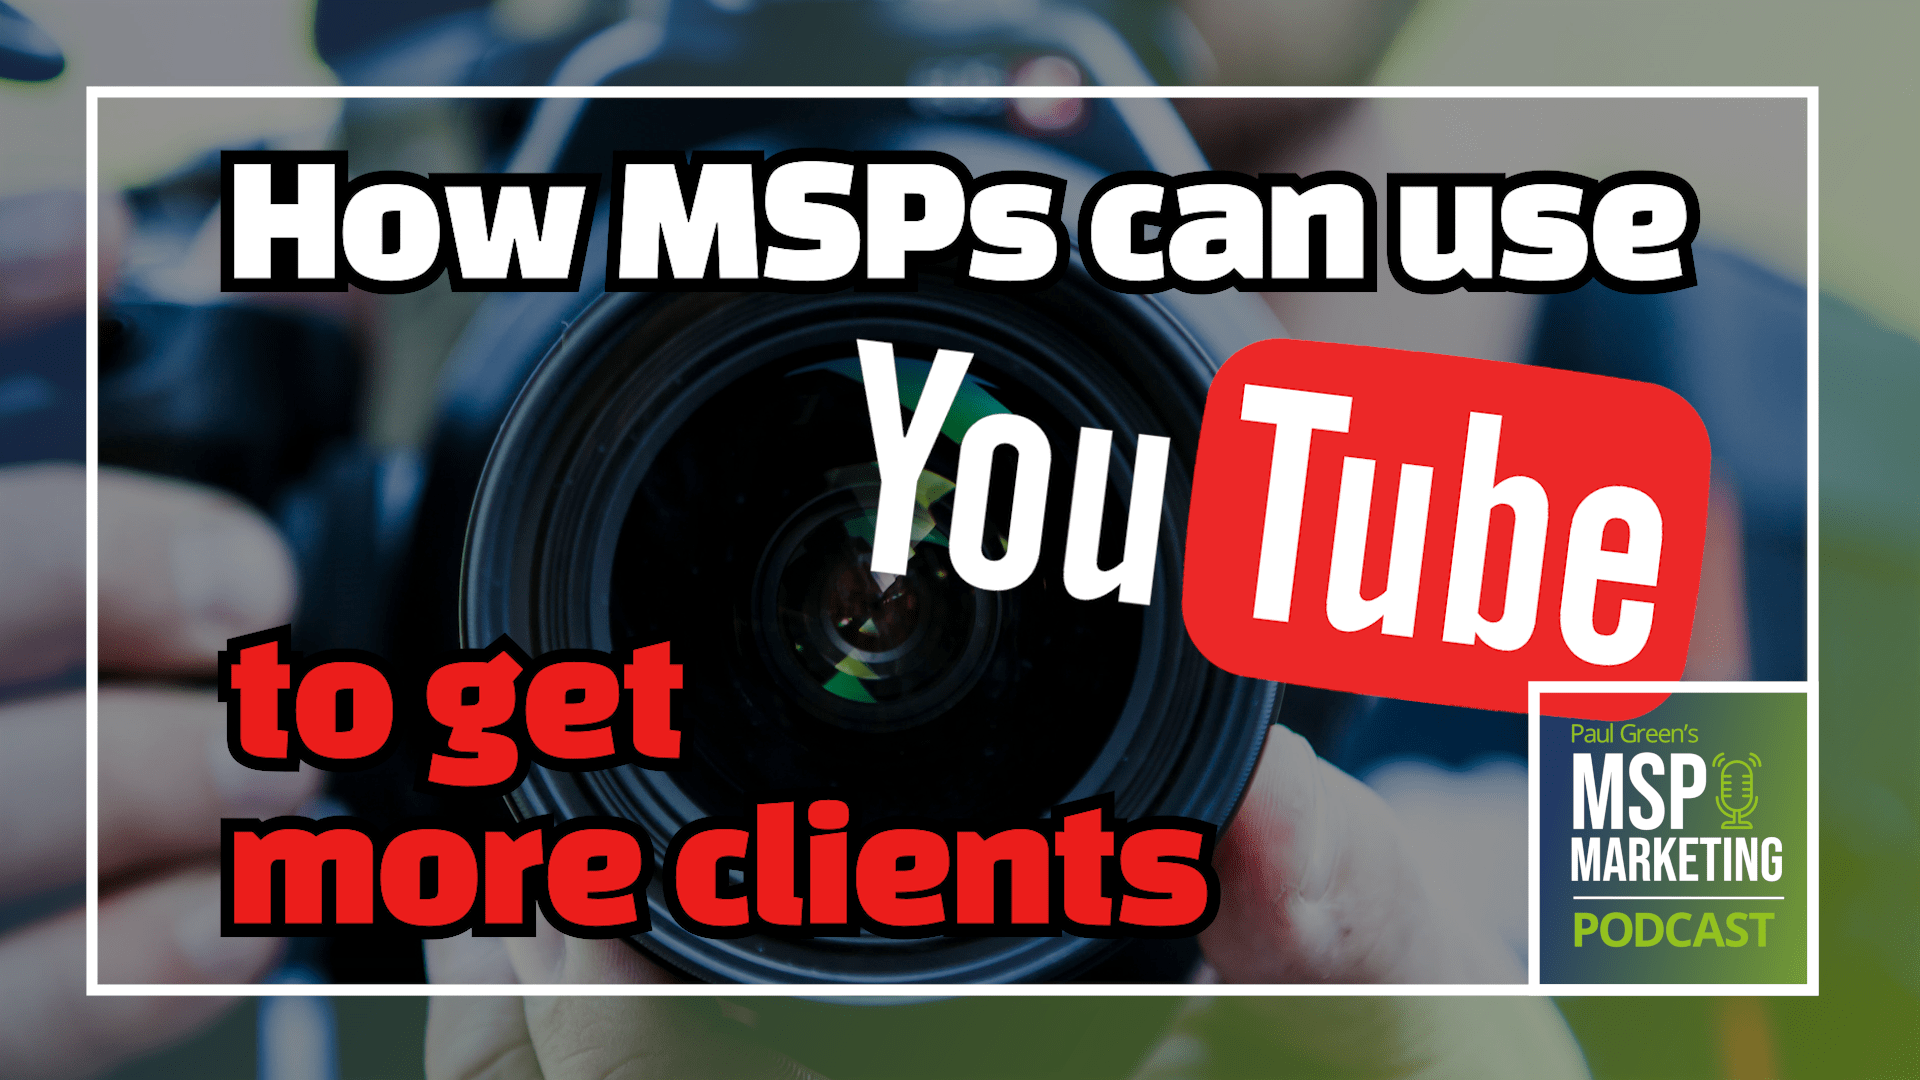 Episode 58: How MSPs can use YouTube to get clients